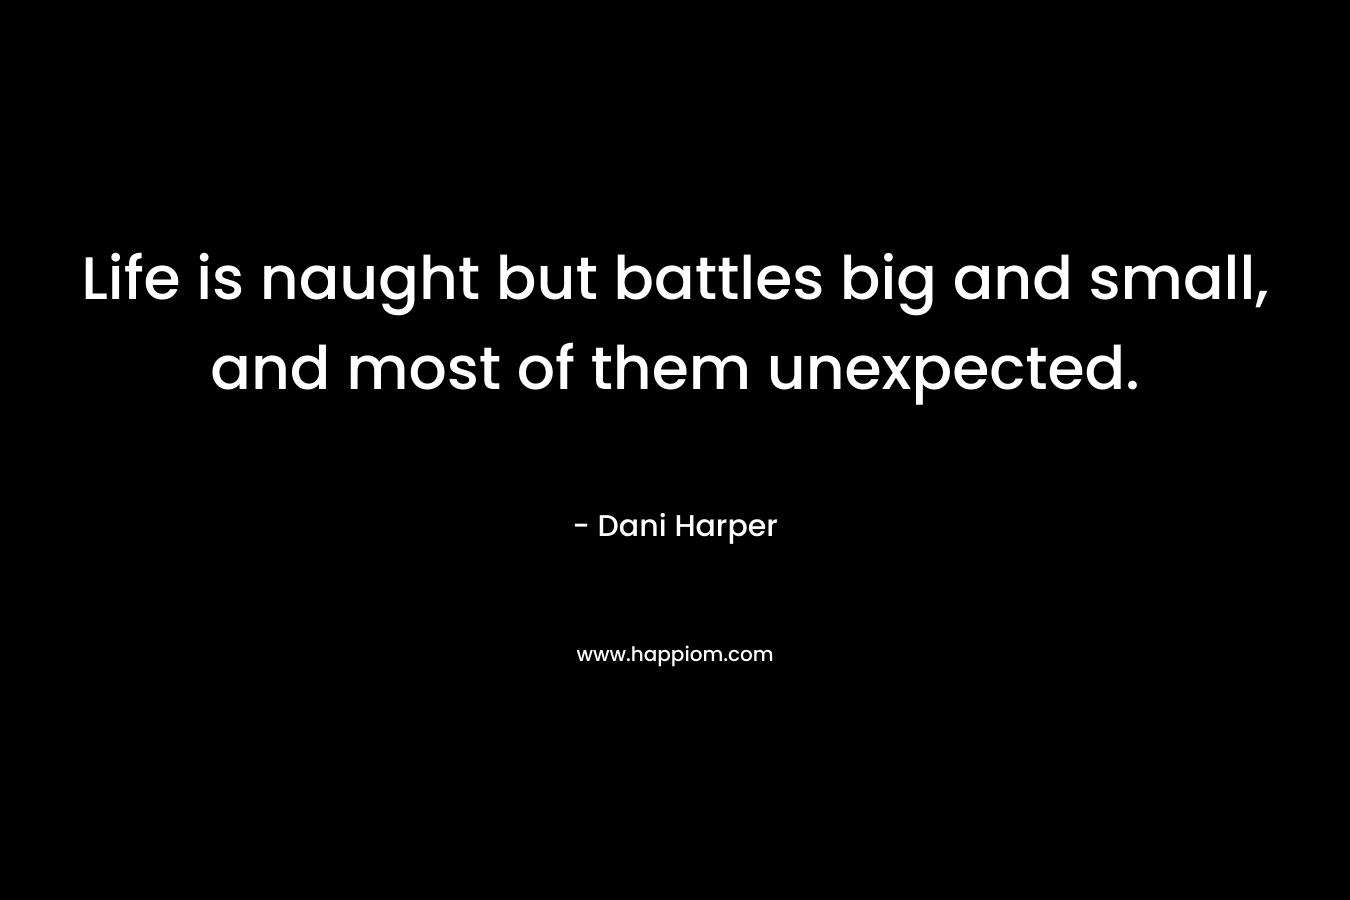 Life is naught but battles big and small, and most of them unexpected.